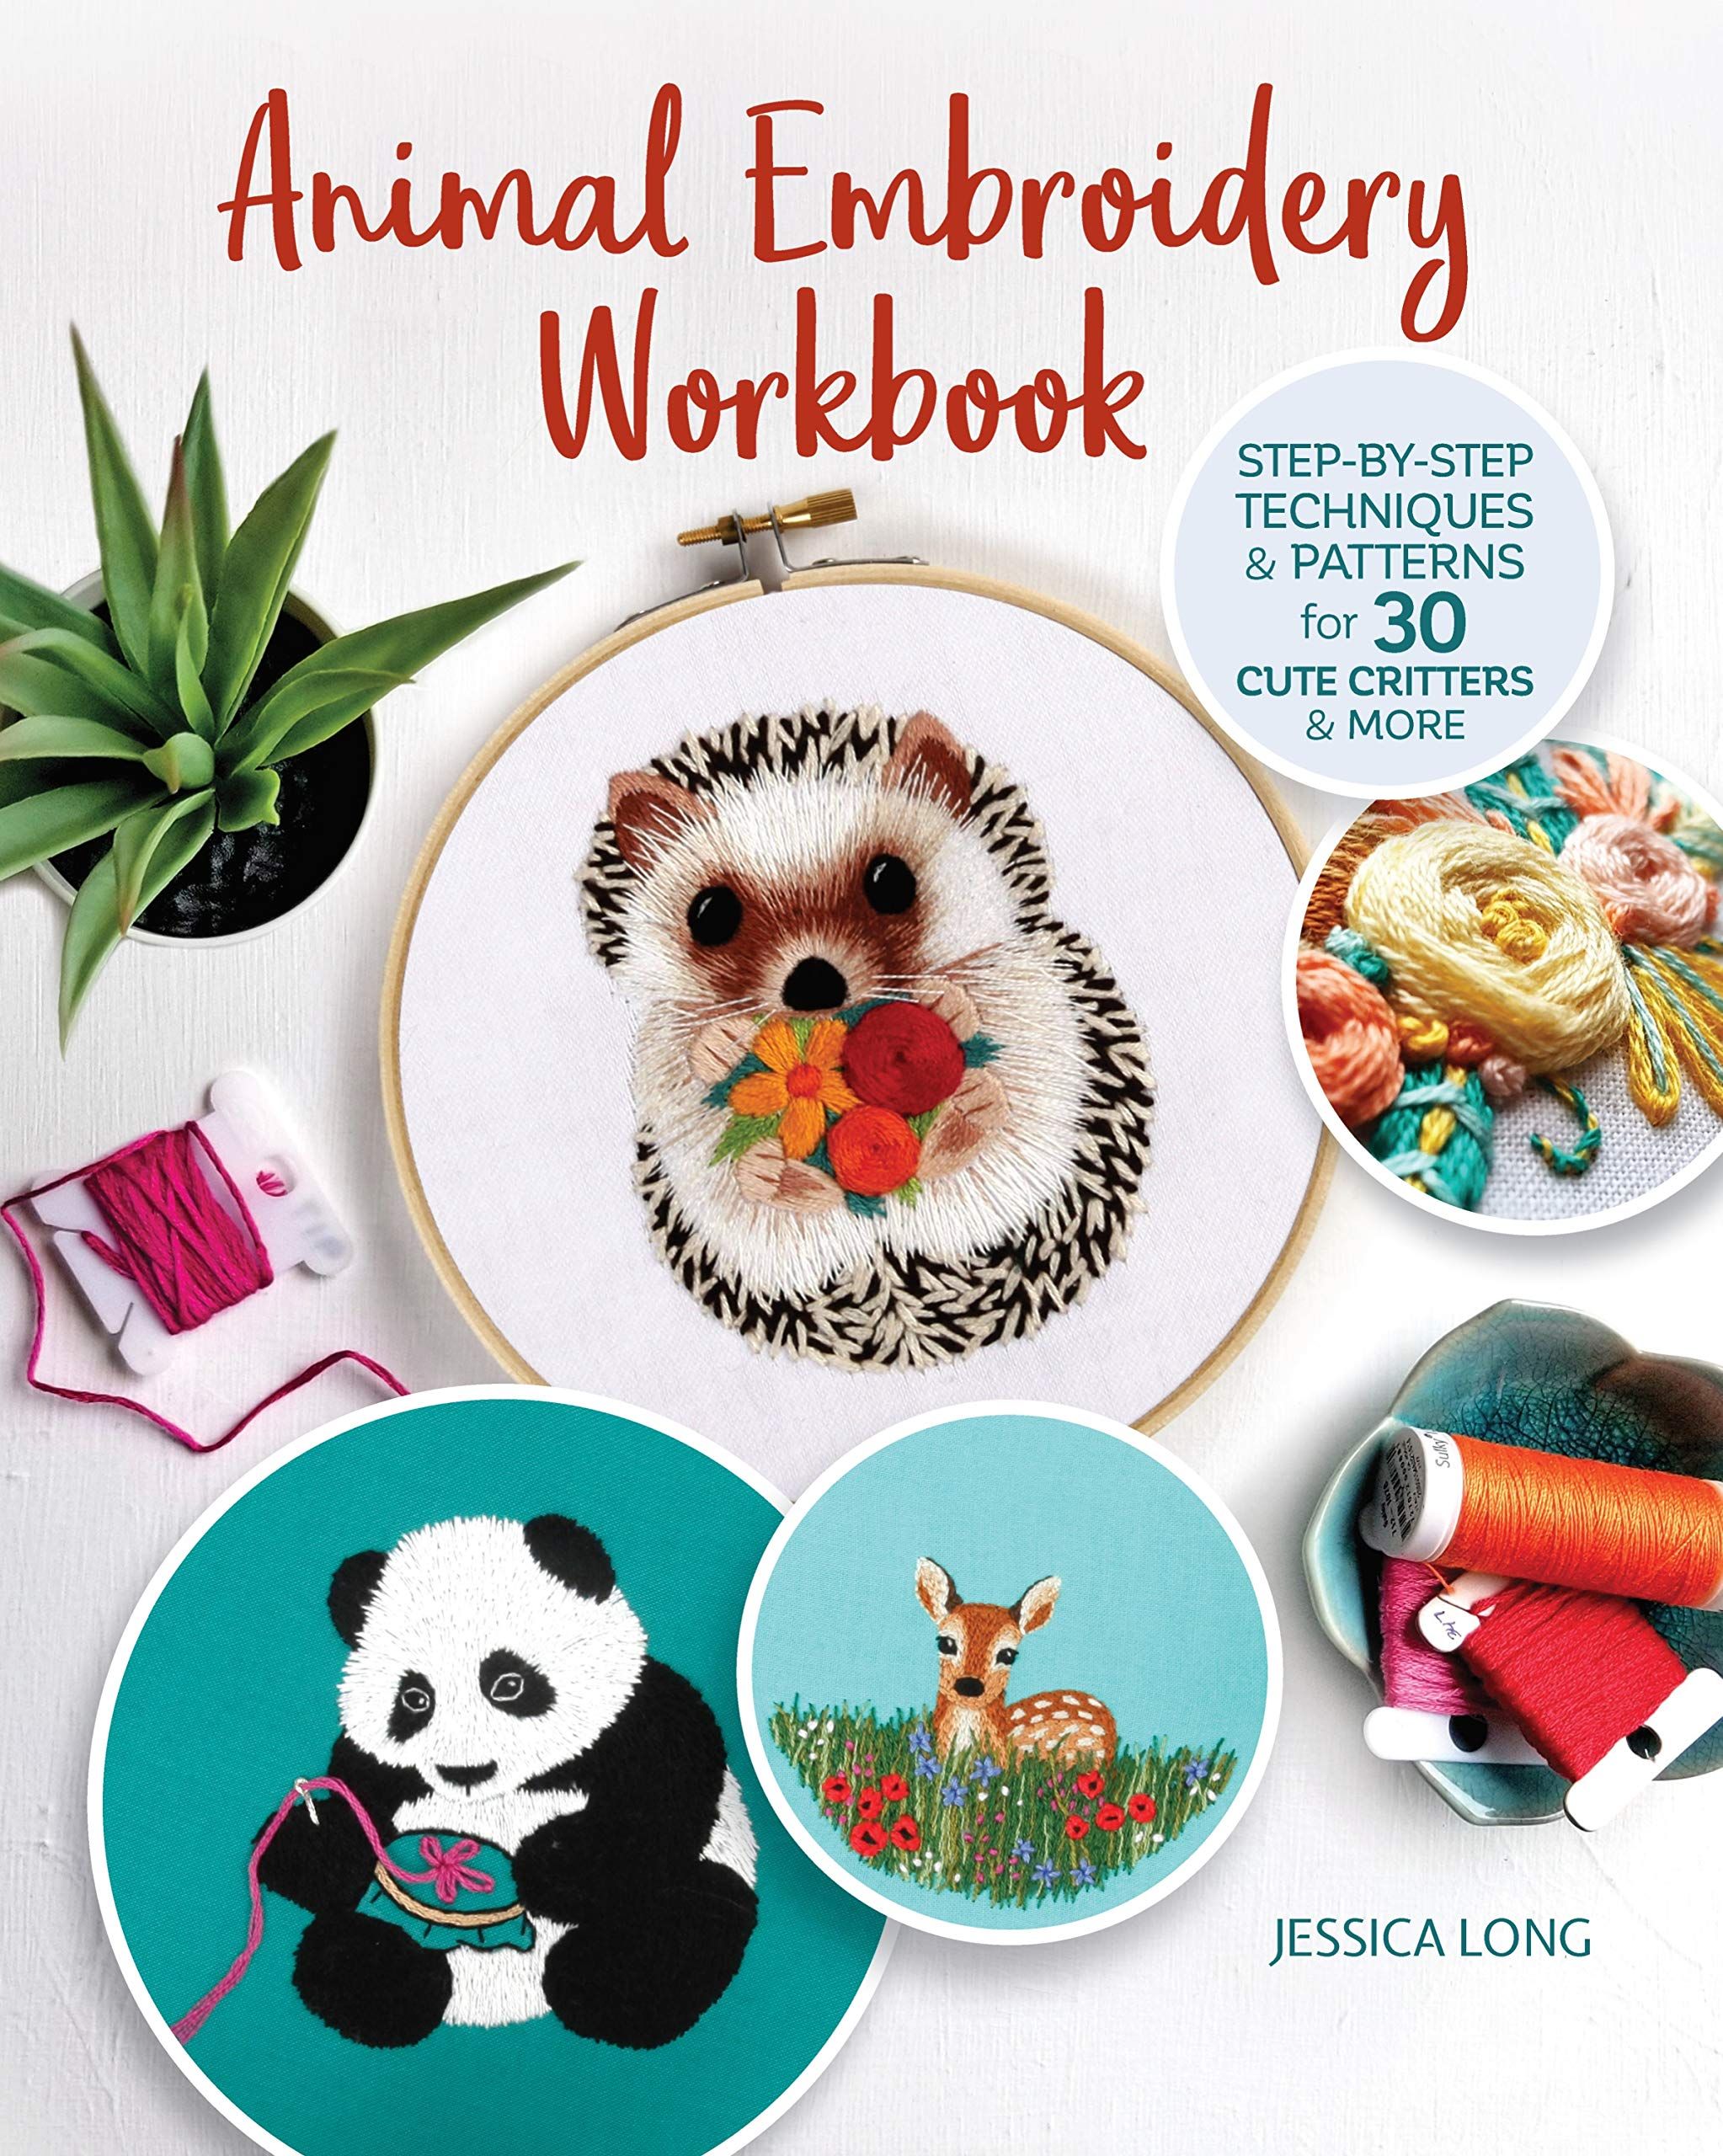 Book cover image of the Animal Embroidery Workbook